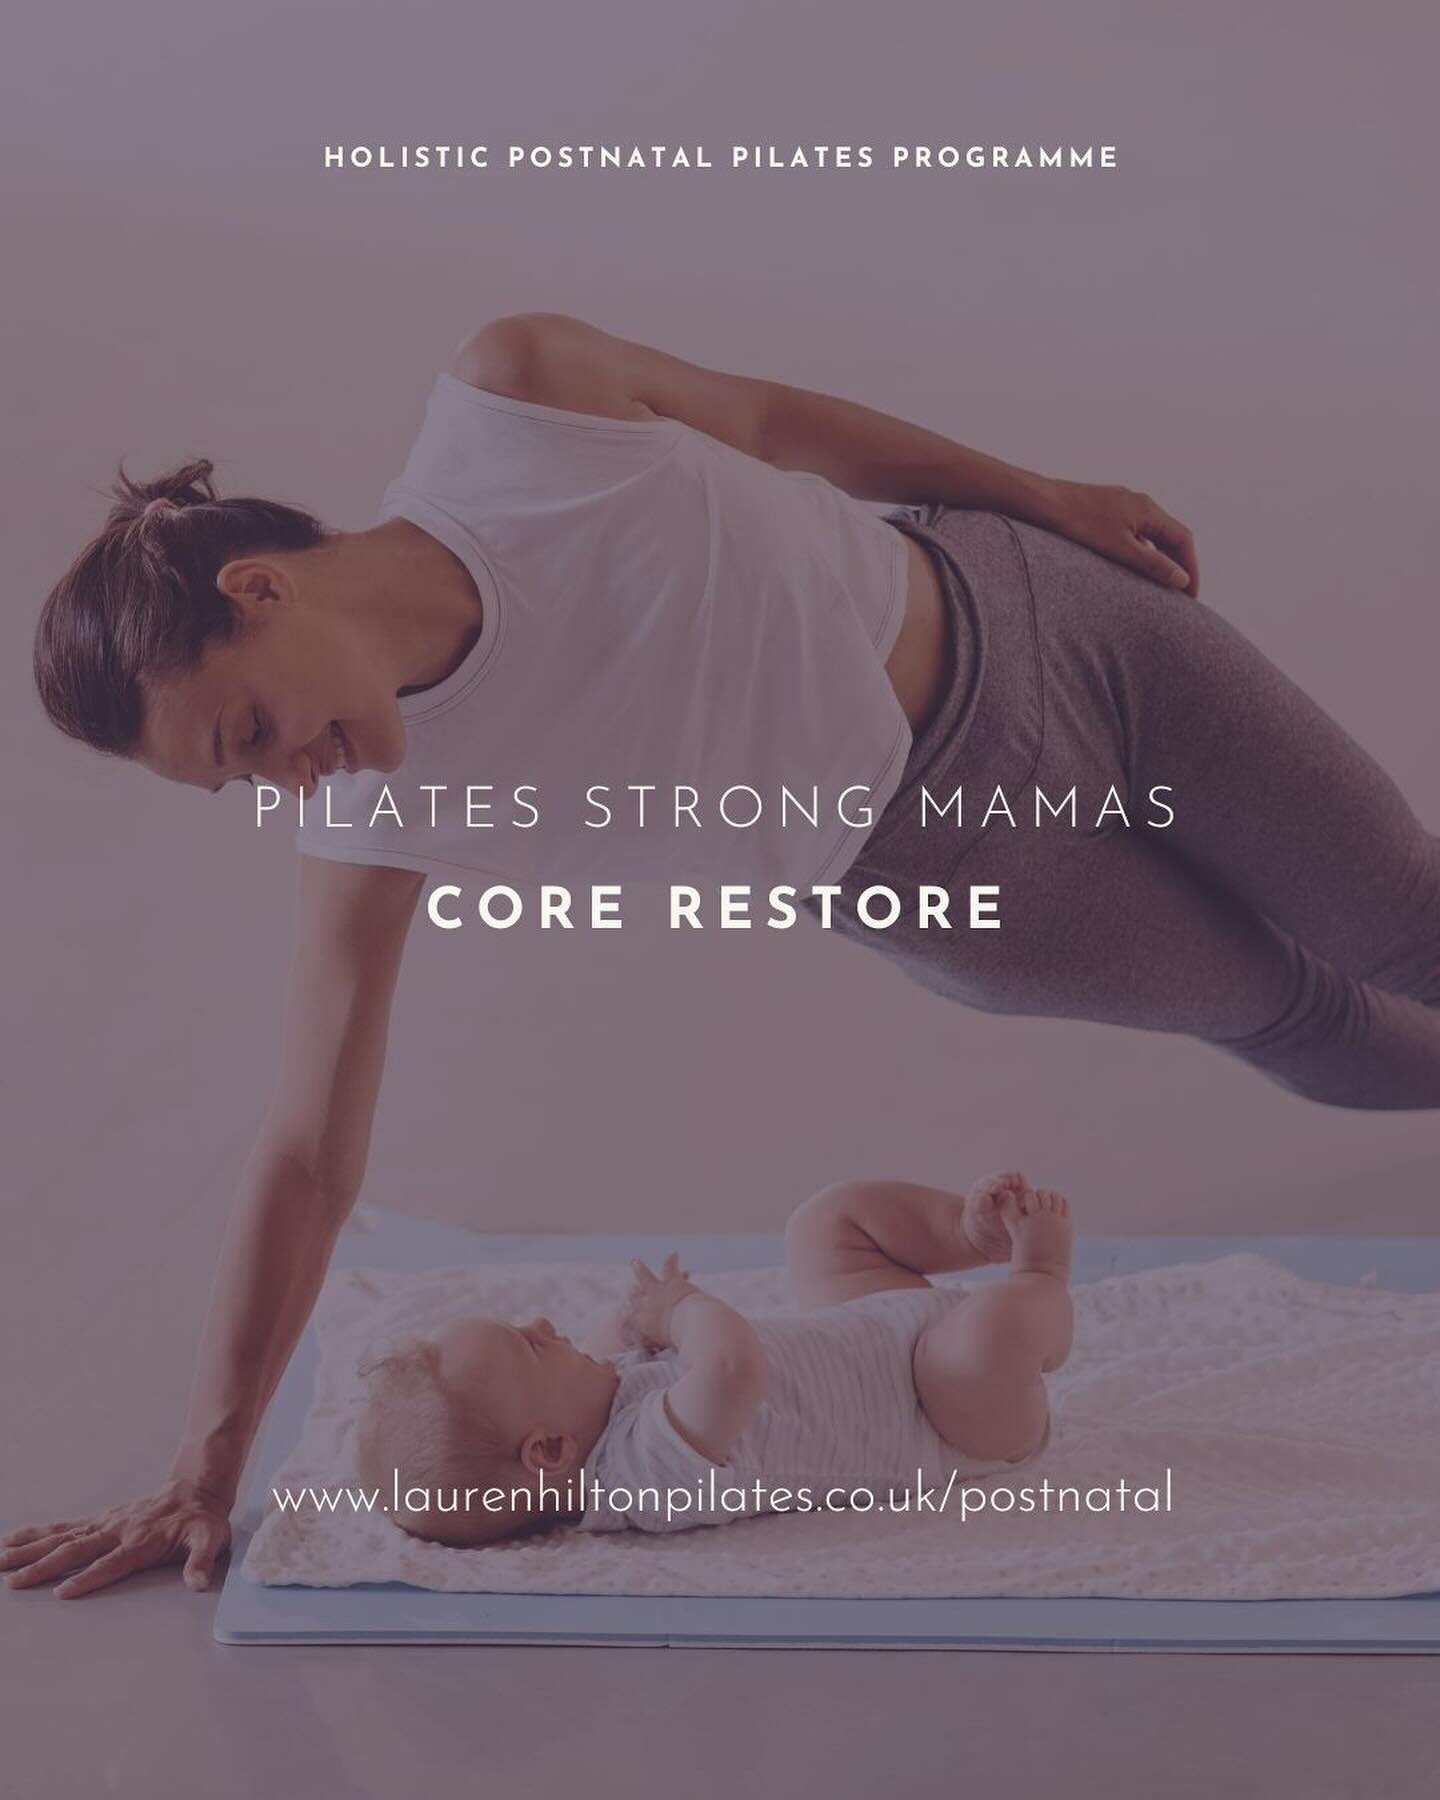 Supporting new mums this IWD, we&rsquo;ve got a fantastic *50% off on our 8 week postnatal core restore course. 

Being a new mum can be tough, and self- care often slips way down the to -do list. But this course is designed to fit around you and you